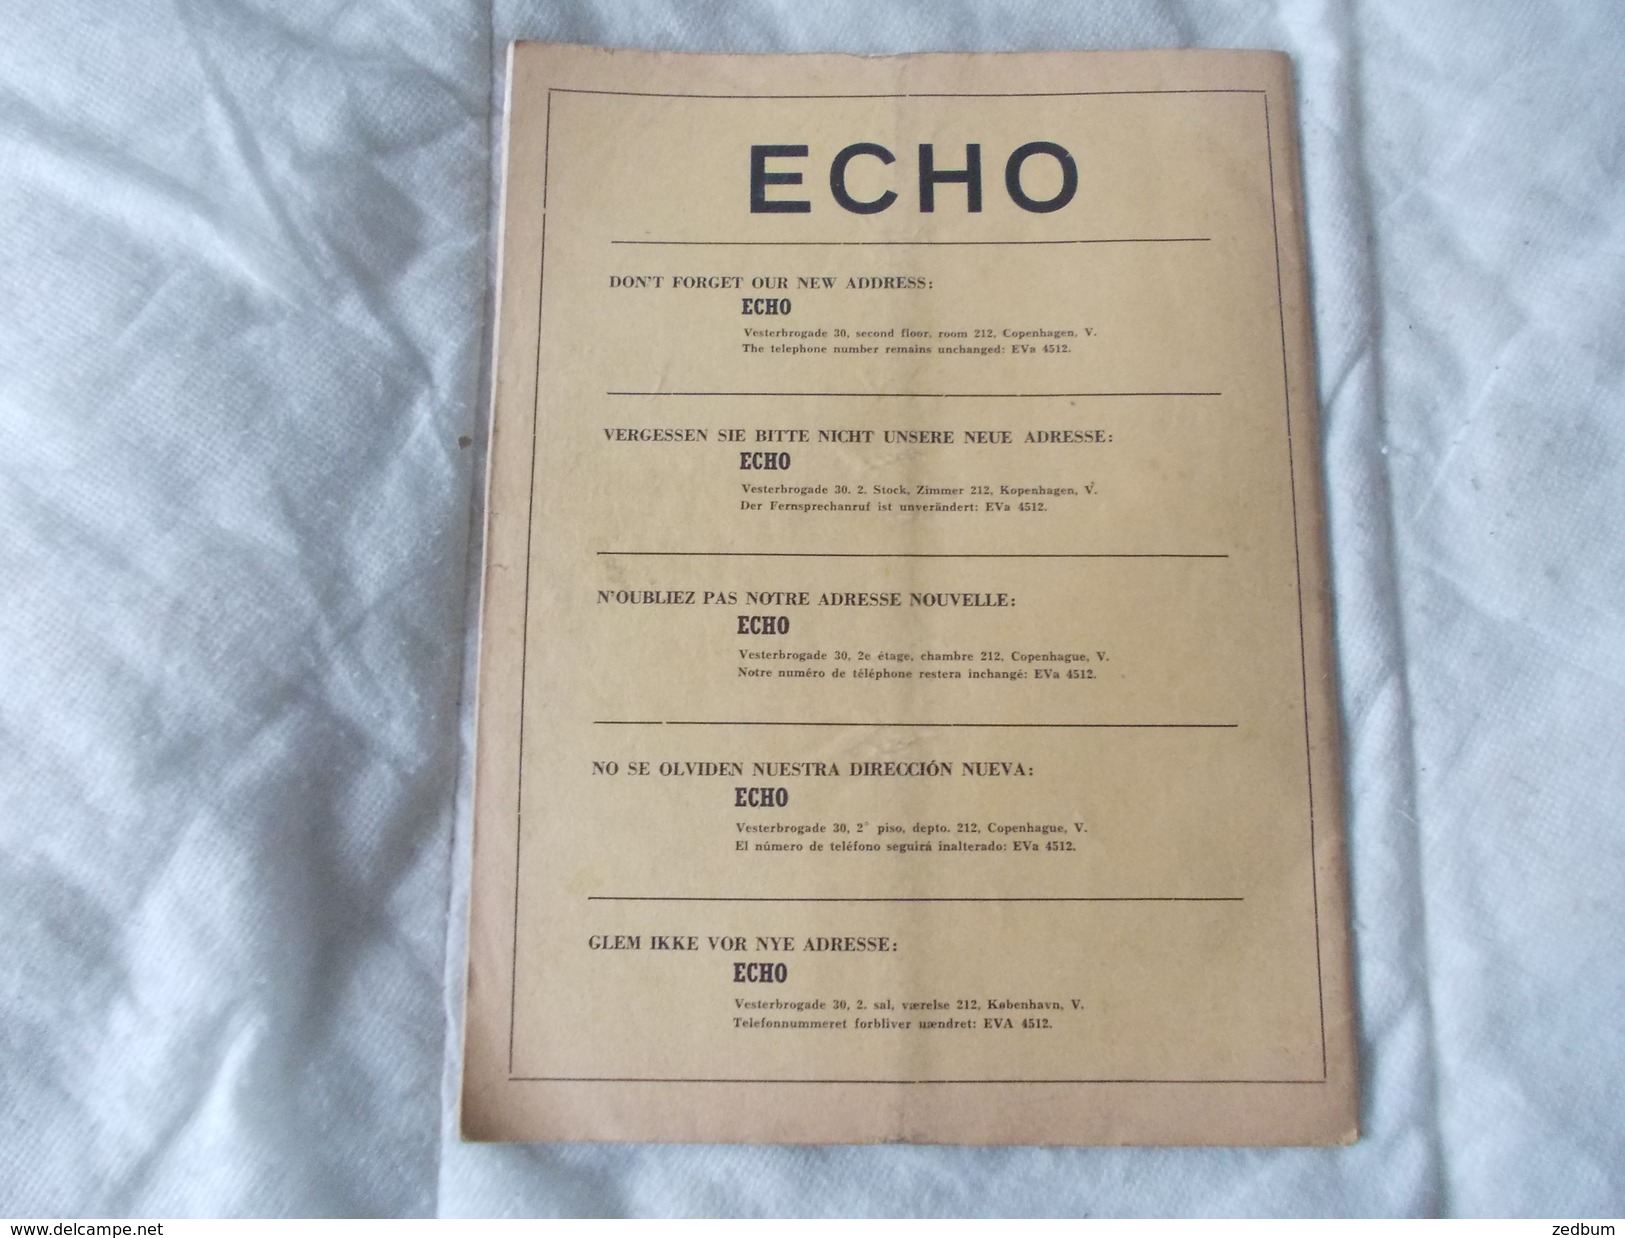 ECHO LTD Professional Circus And Variety Journal Independent International N° 234 August 1961 - Divertimento